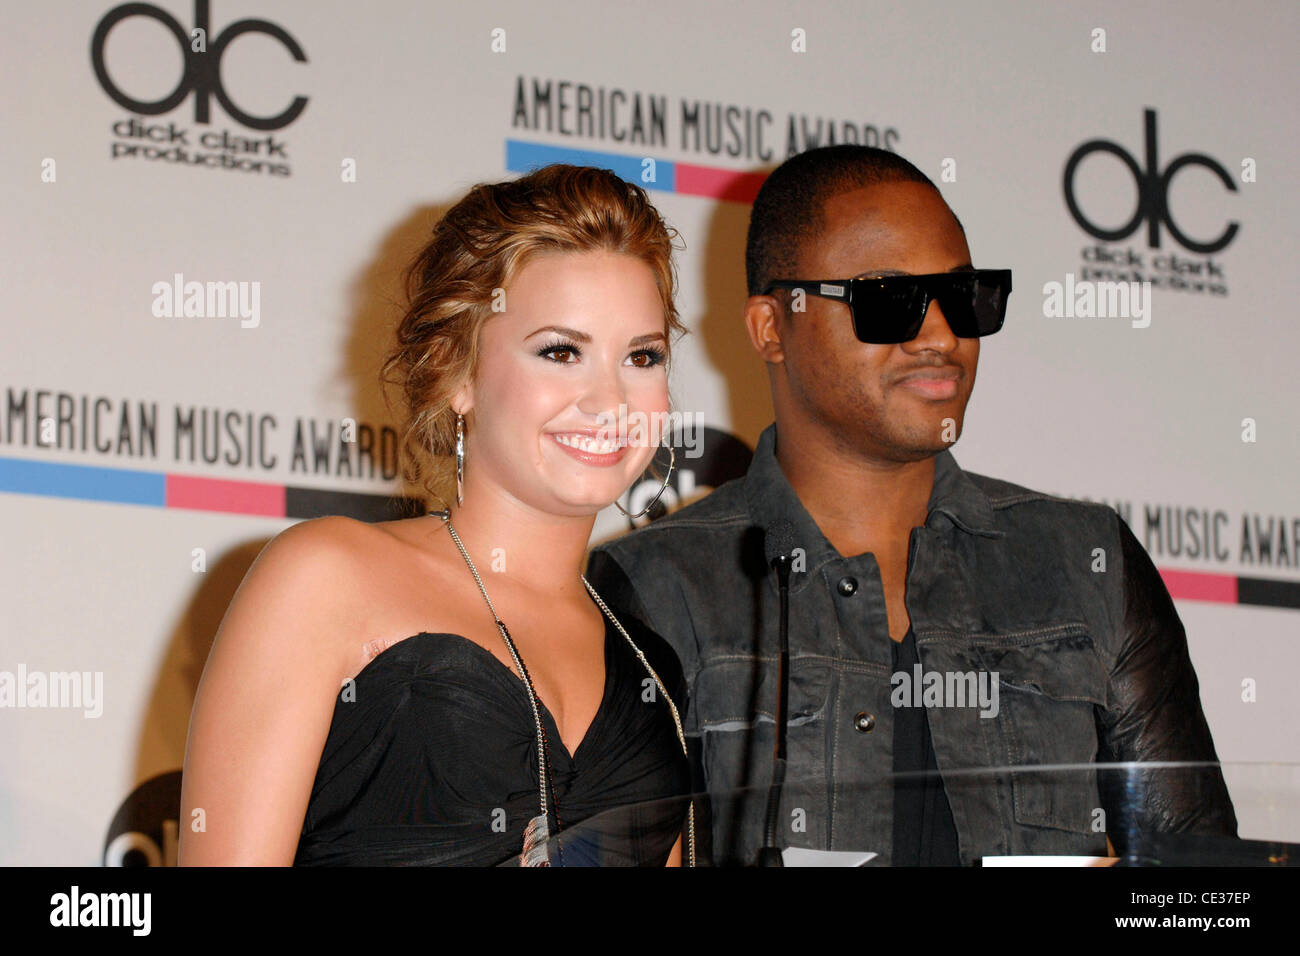 Demi Lovato and Taio Cruz 2010 American Music Awards Nominations held at the JW Marriott  Los Angeles, California - 12.10.10 Stock Photo